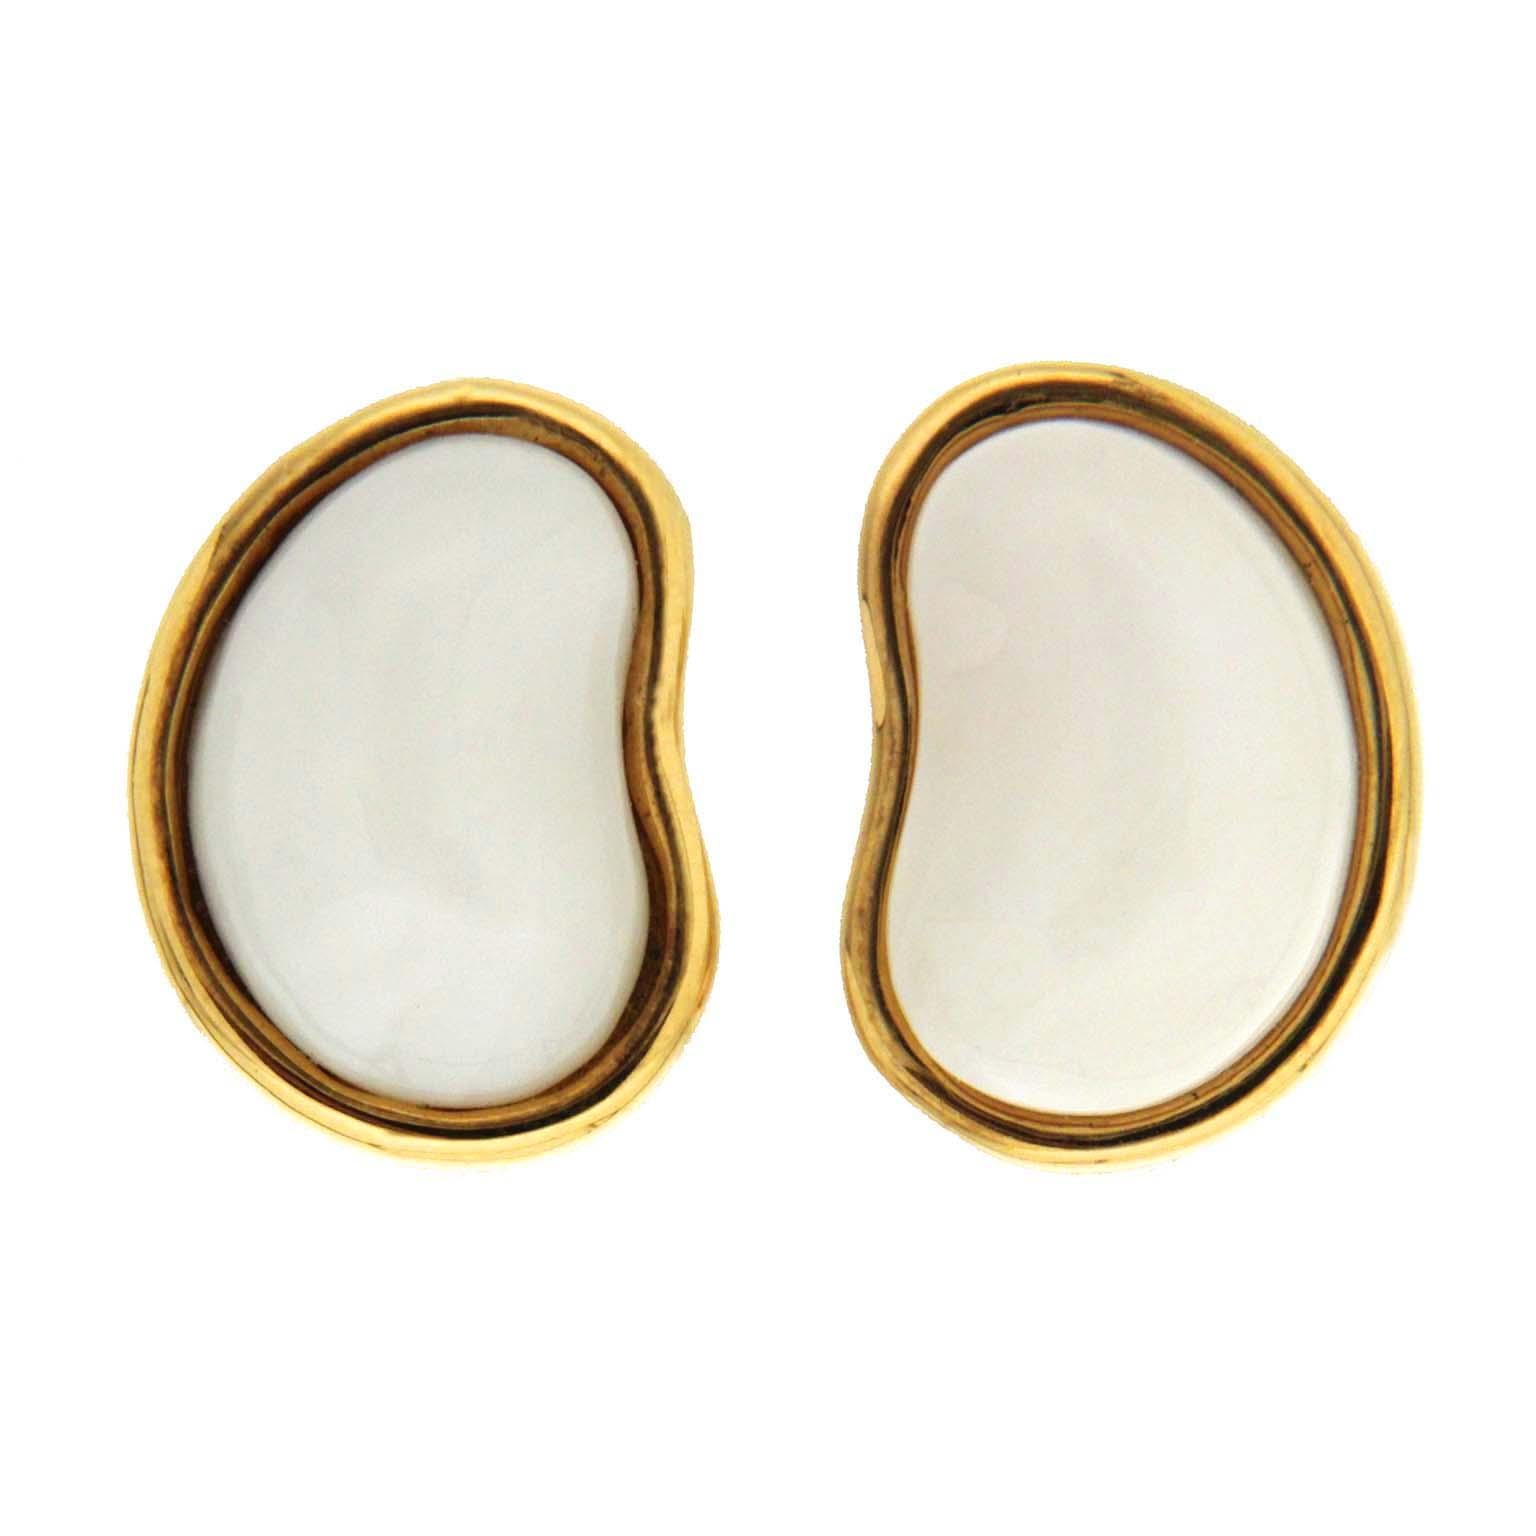 Valentin Magro White Coral Gold Bean Shaped Earrings